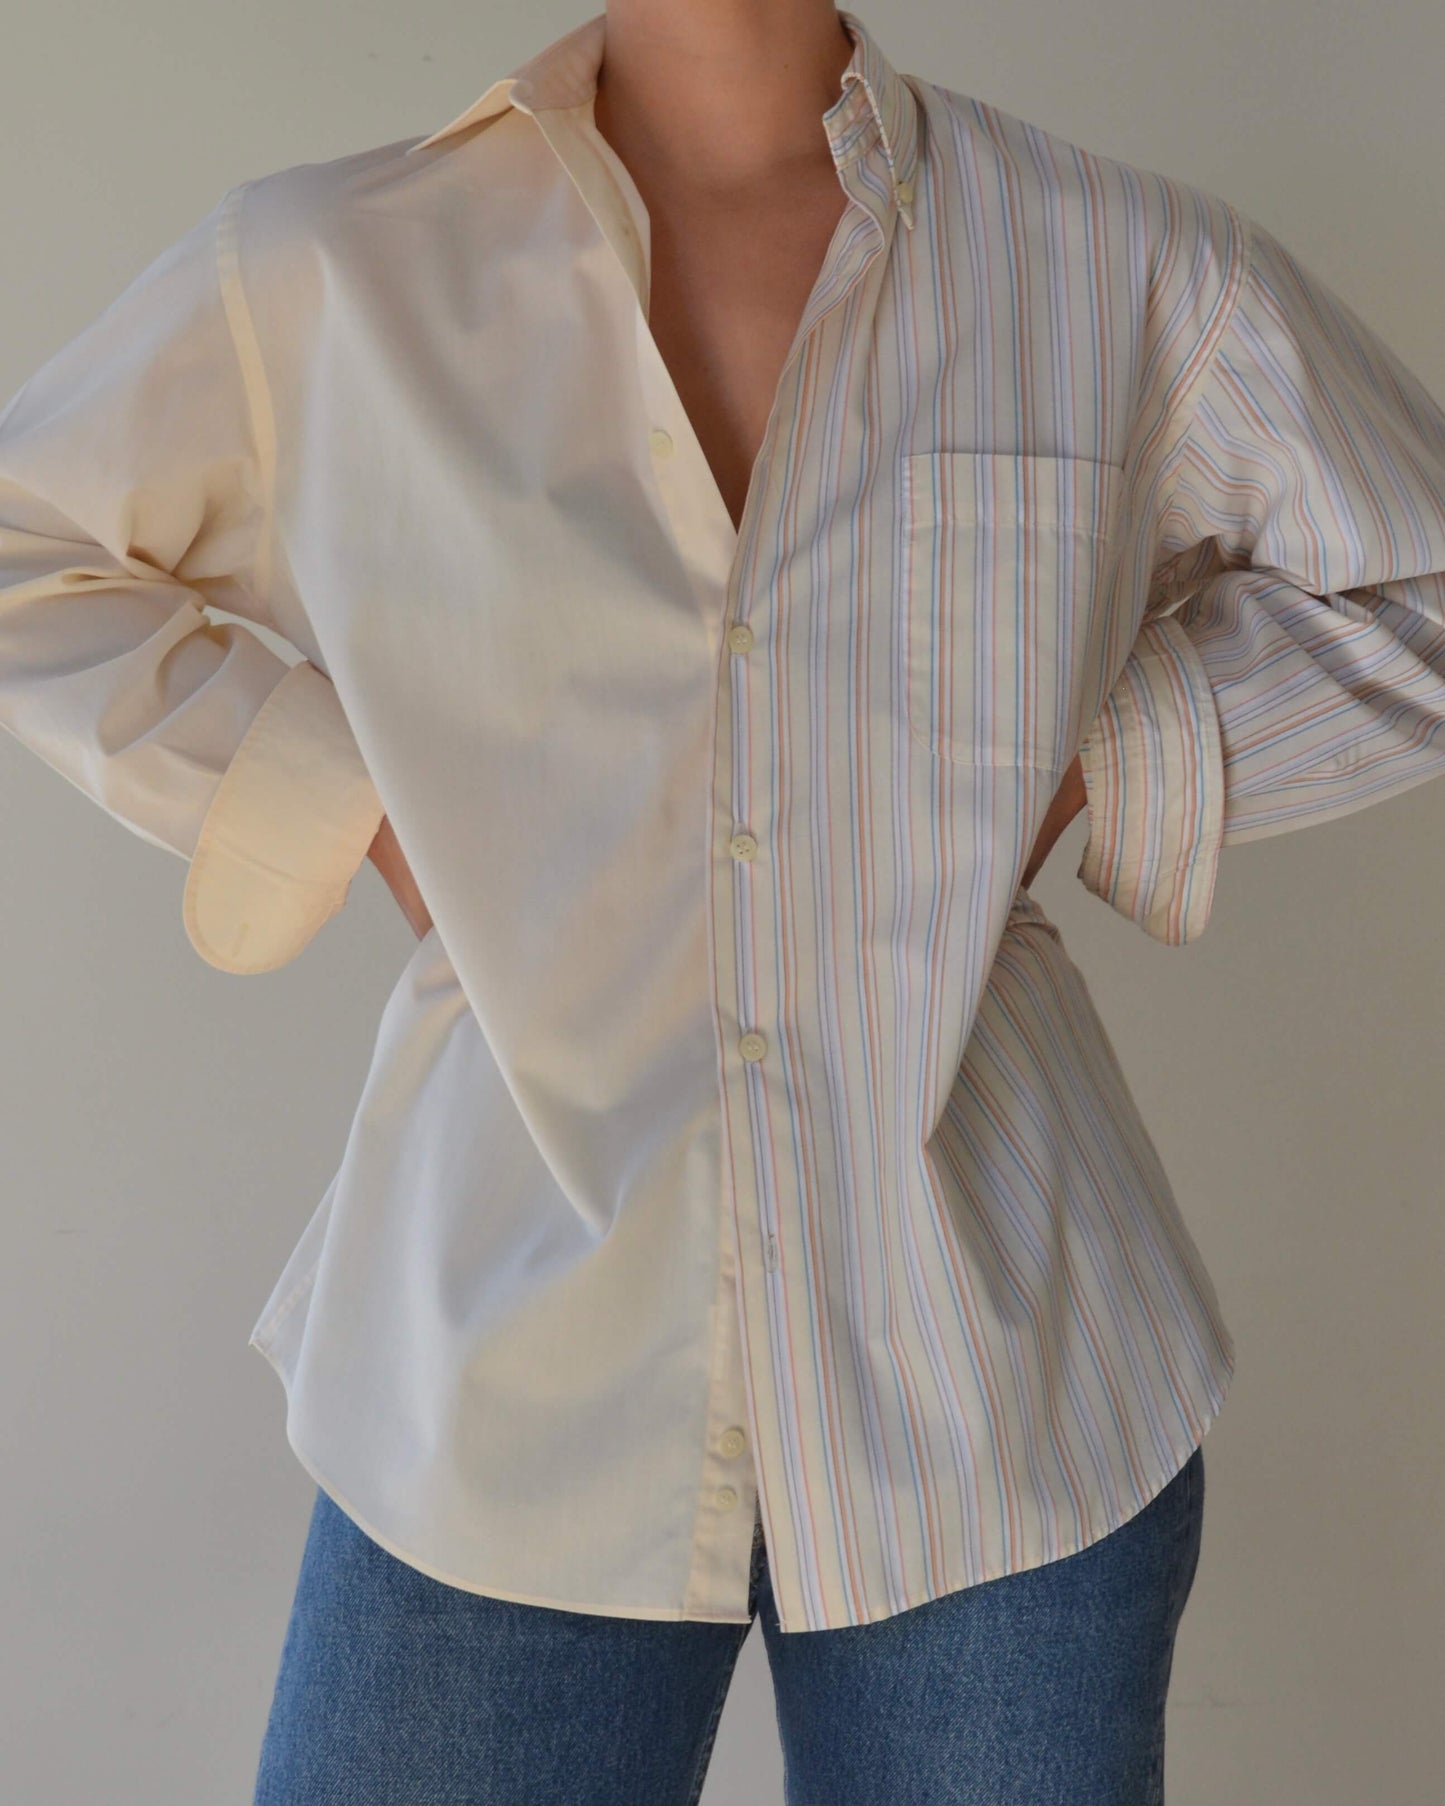 DUO Shirt - breeze stripes on yellow (S/L)